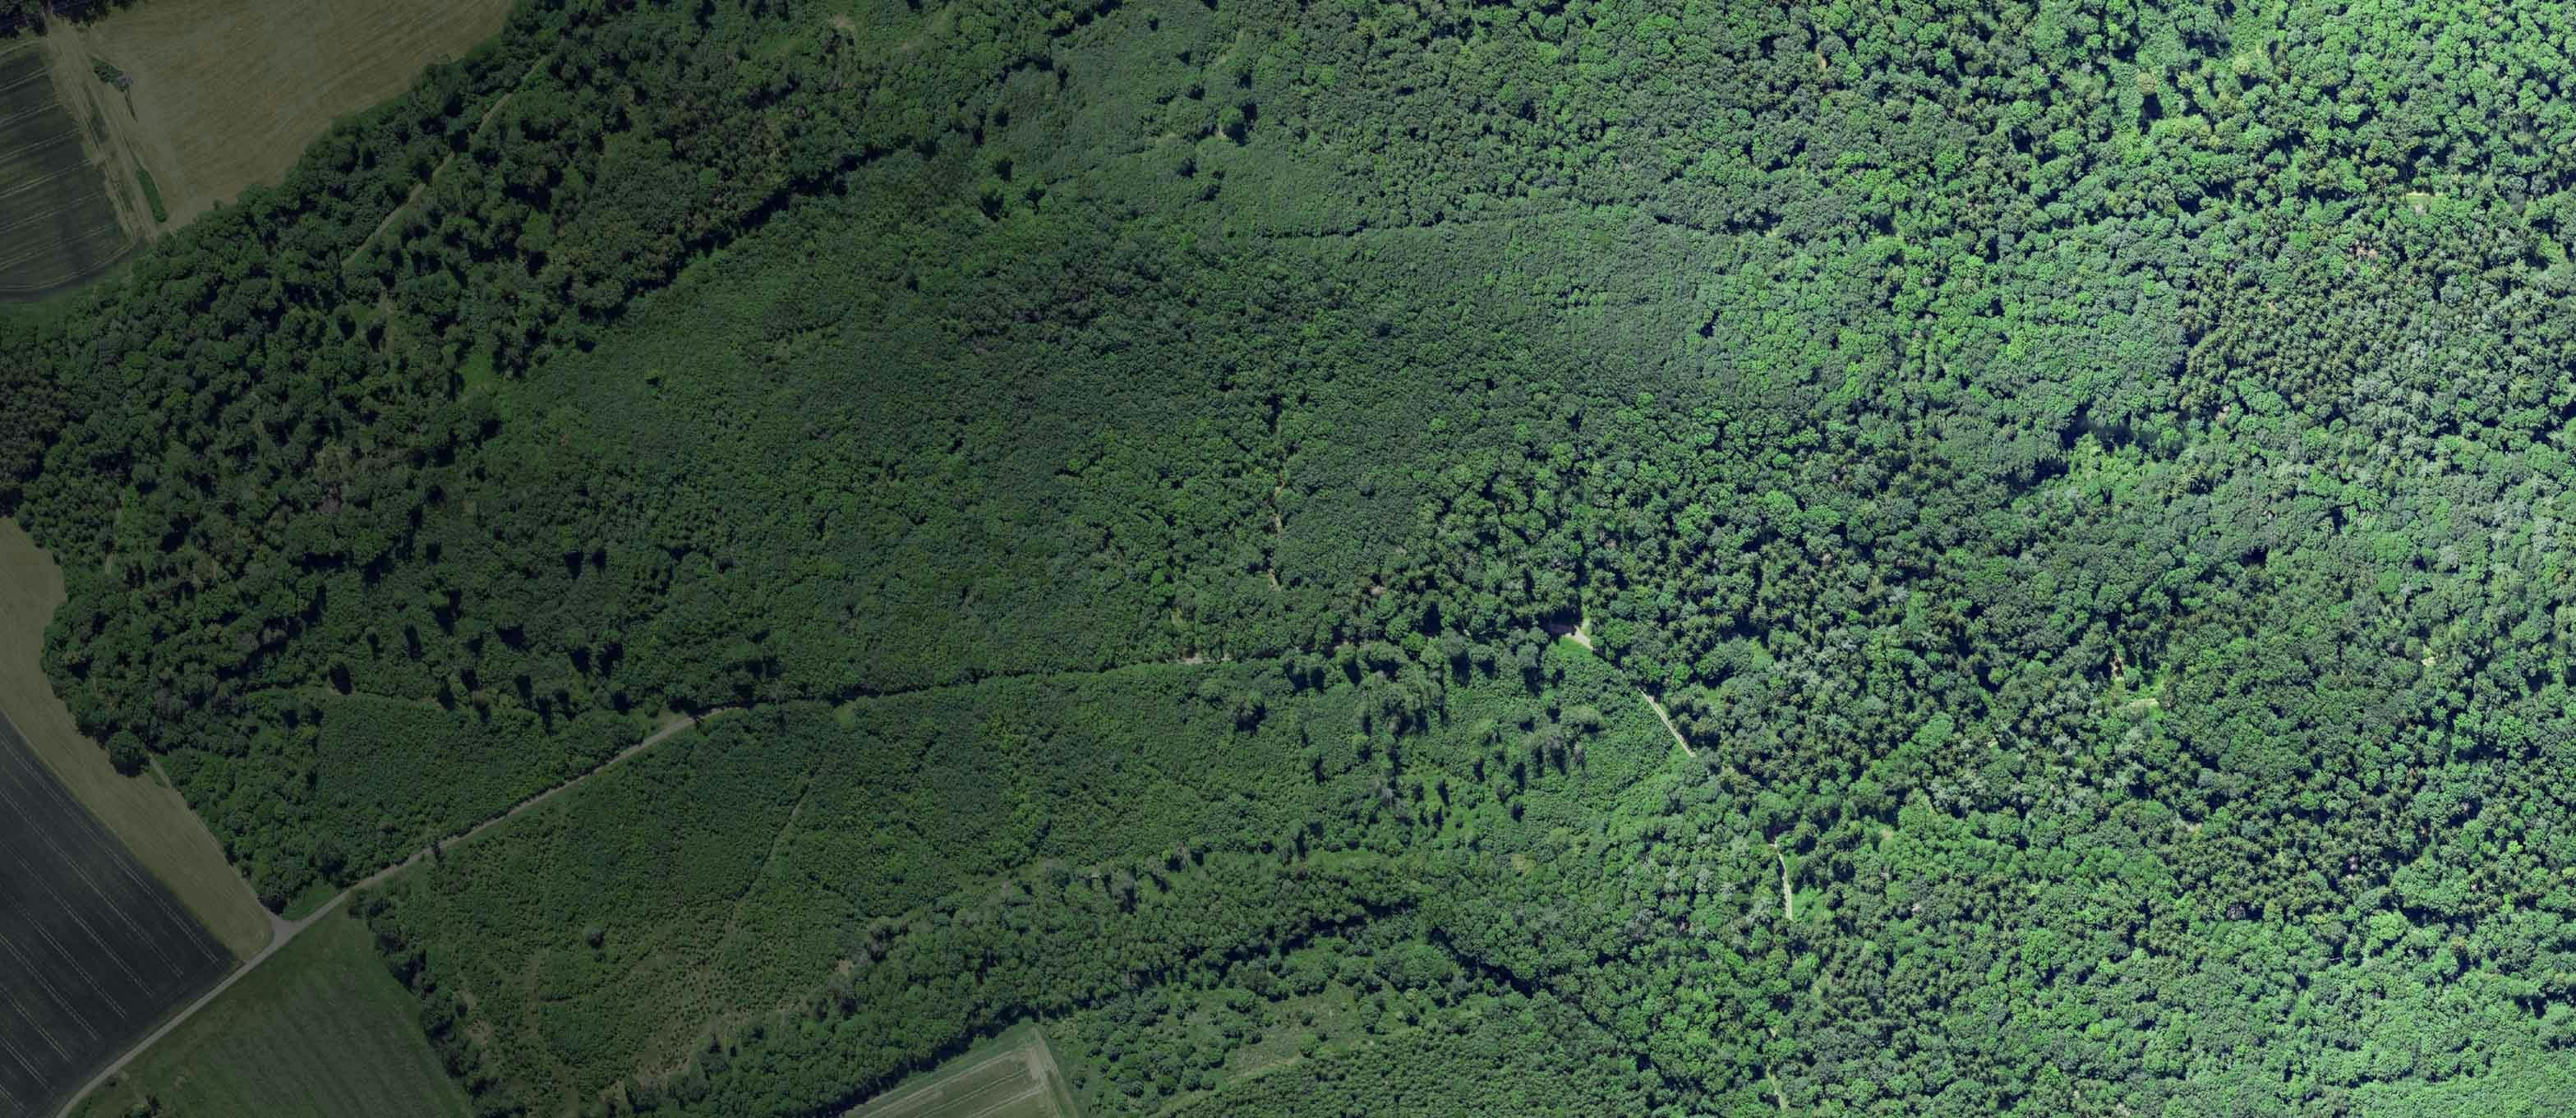 Aerial image of a forest area